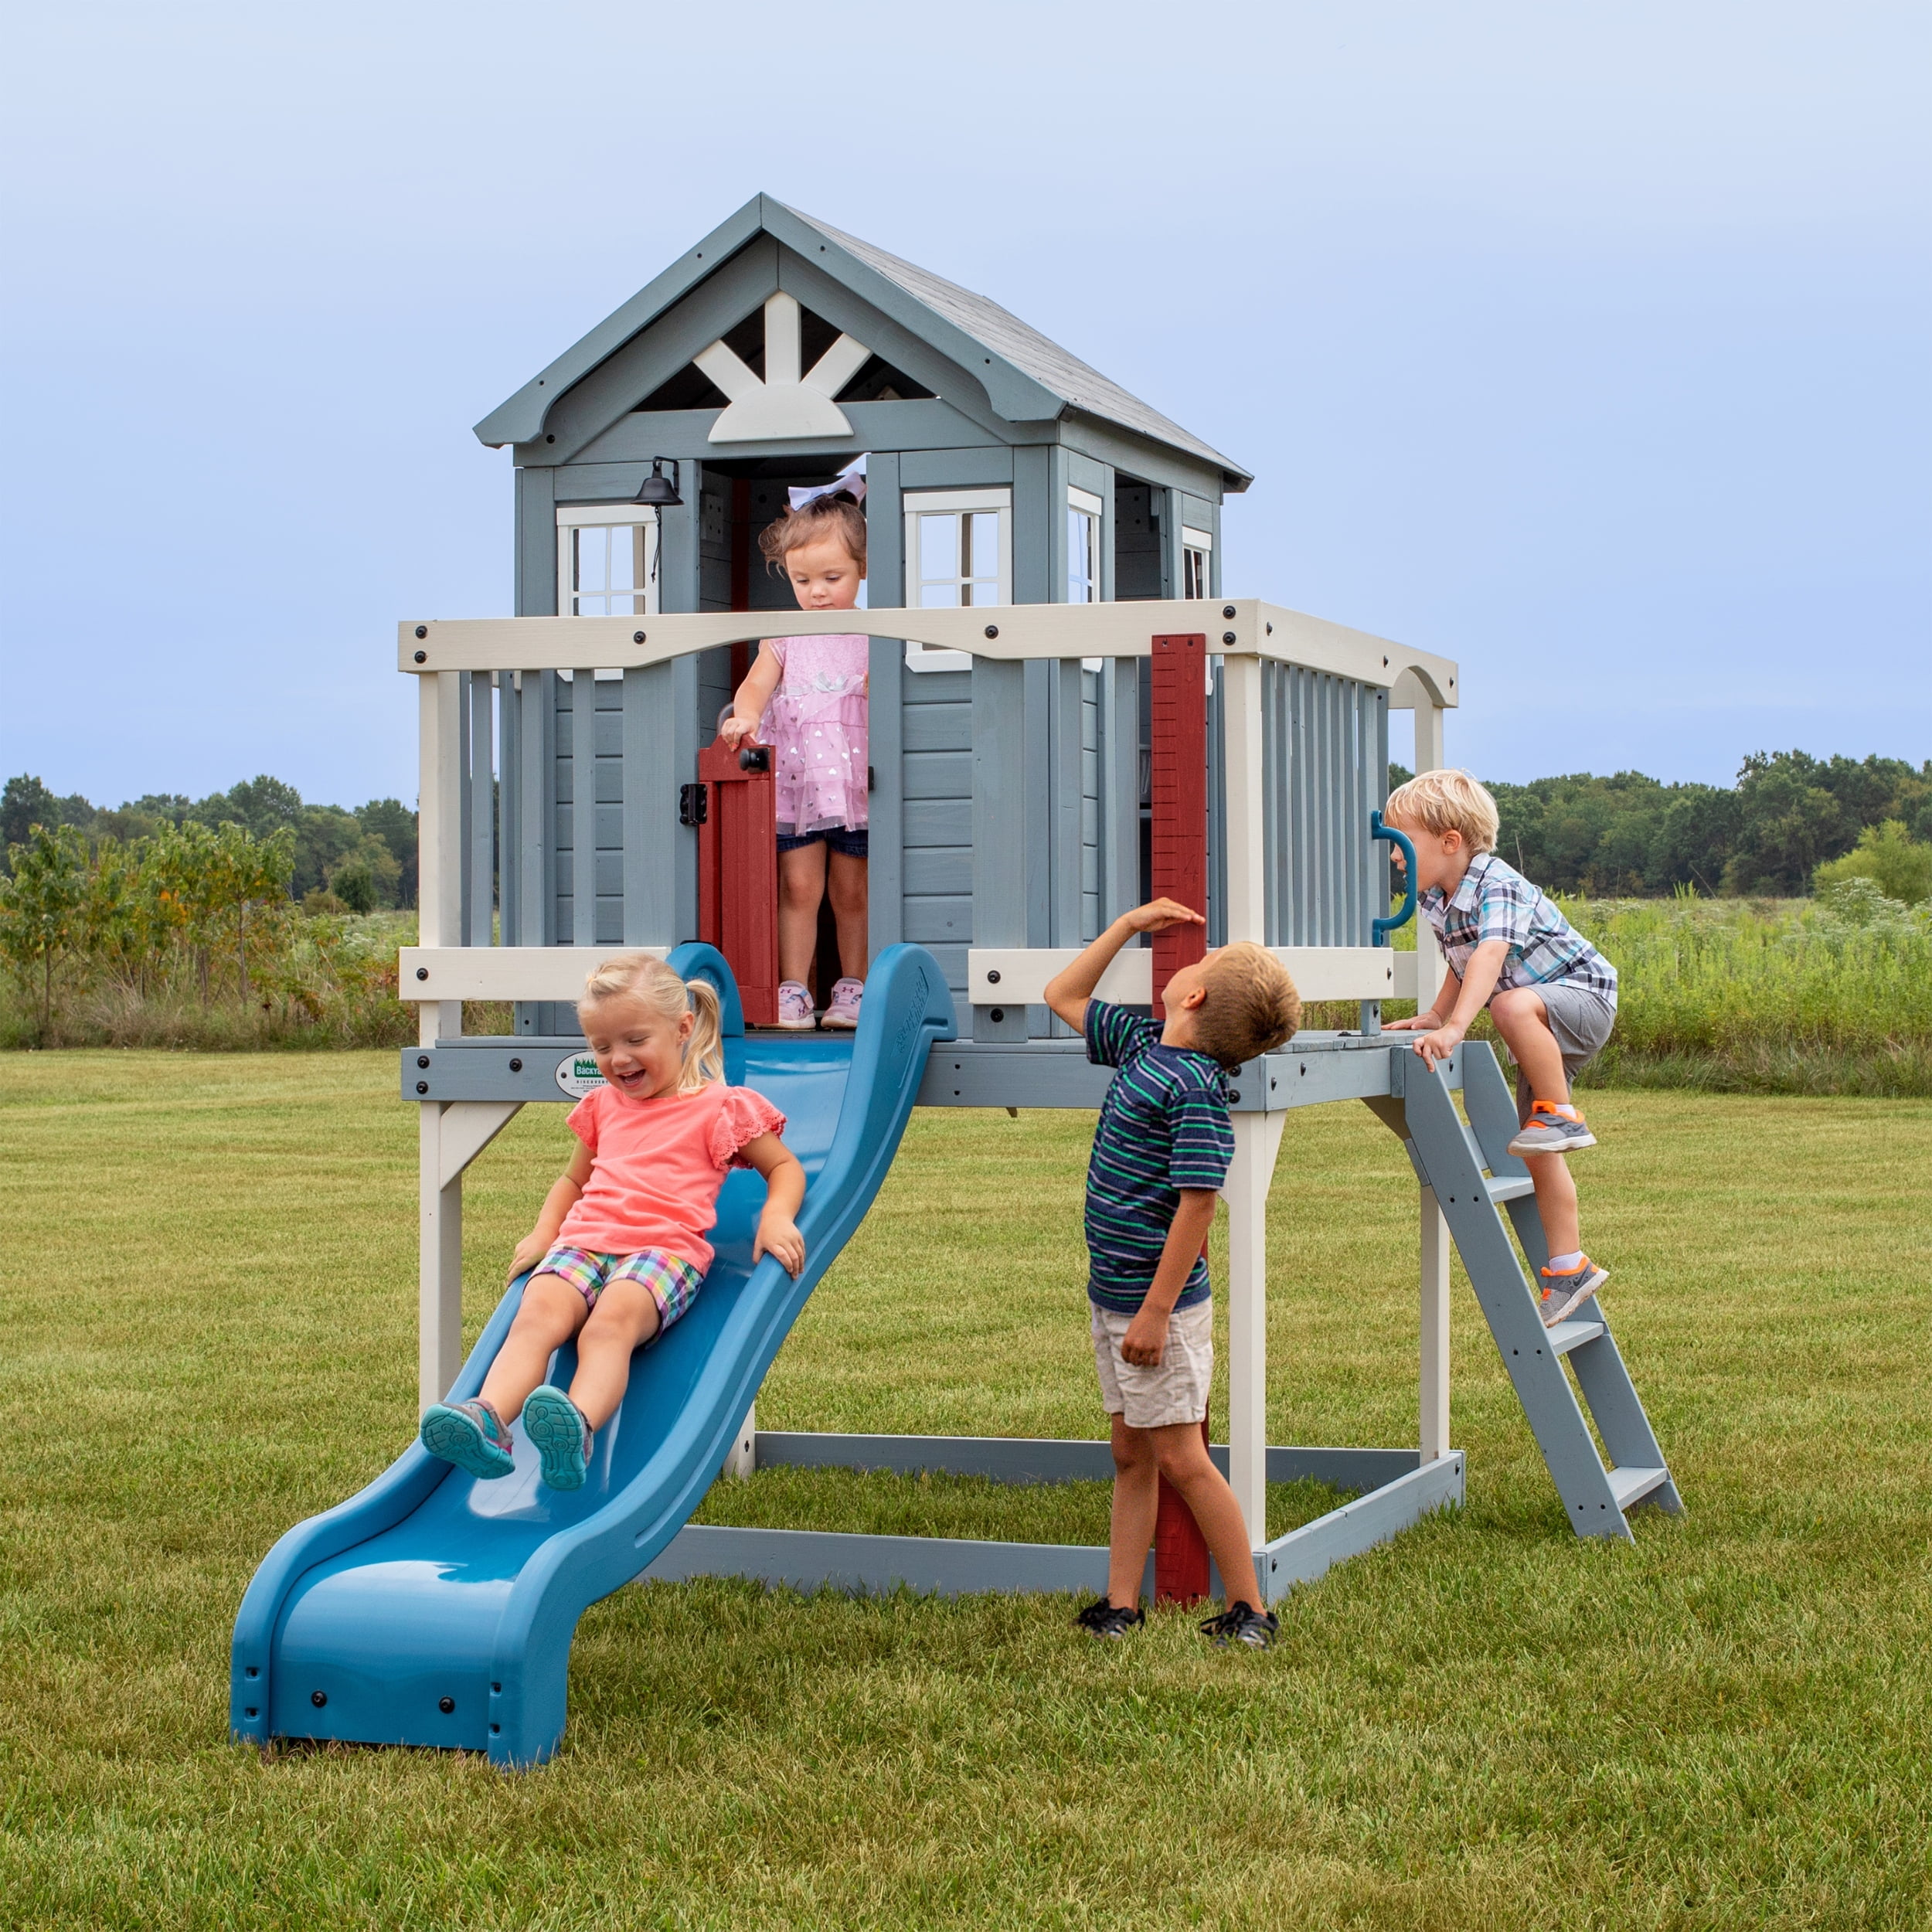 Clubhouse Mini Kitchen Outdoor Backyard Playhouse Free Shipping! New 